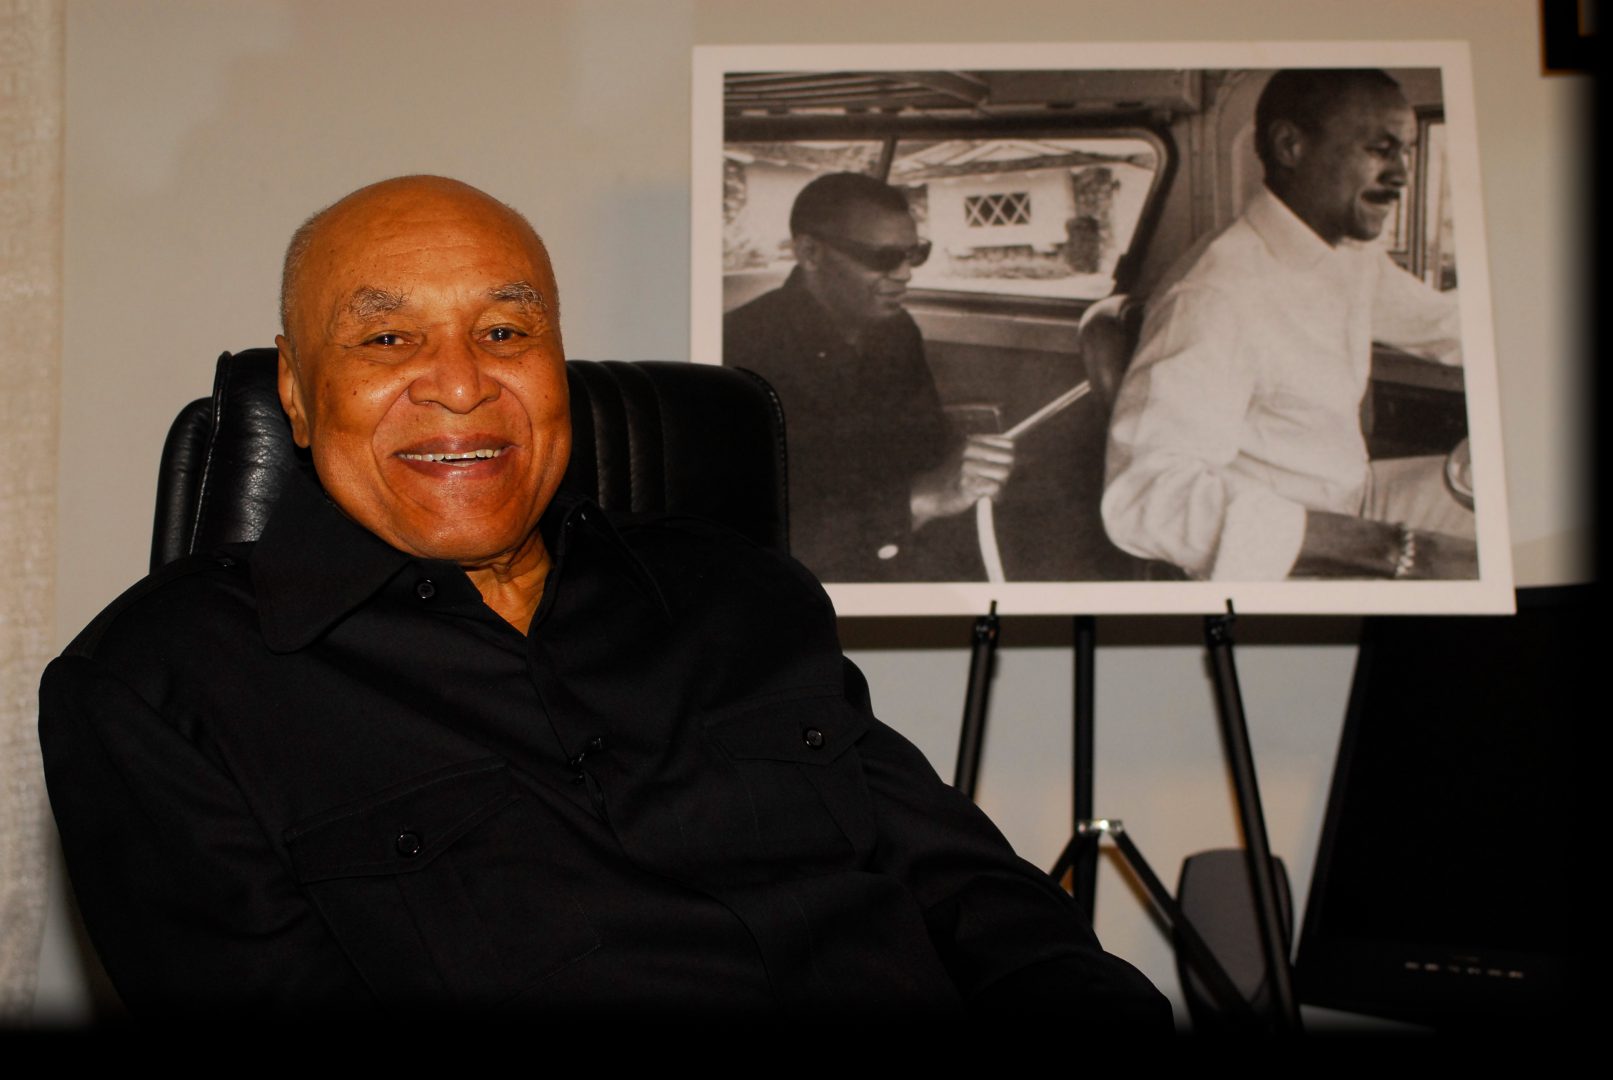 Joe Adams sitting in front of photo of Ray Charles